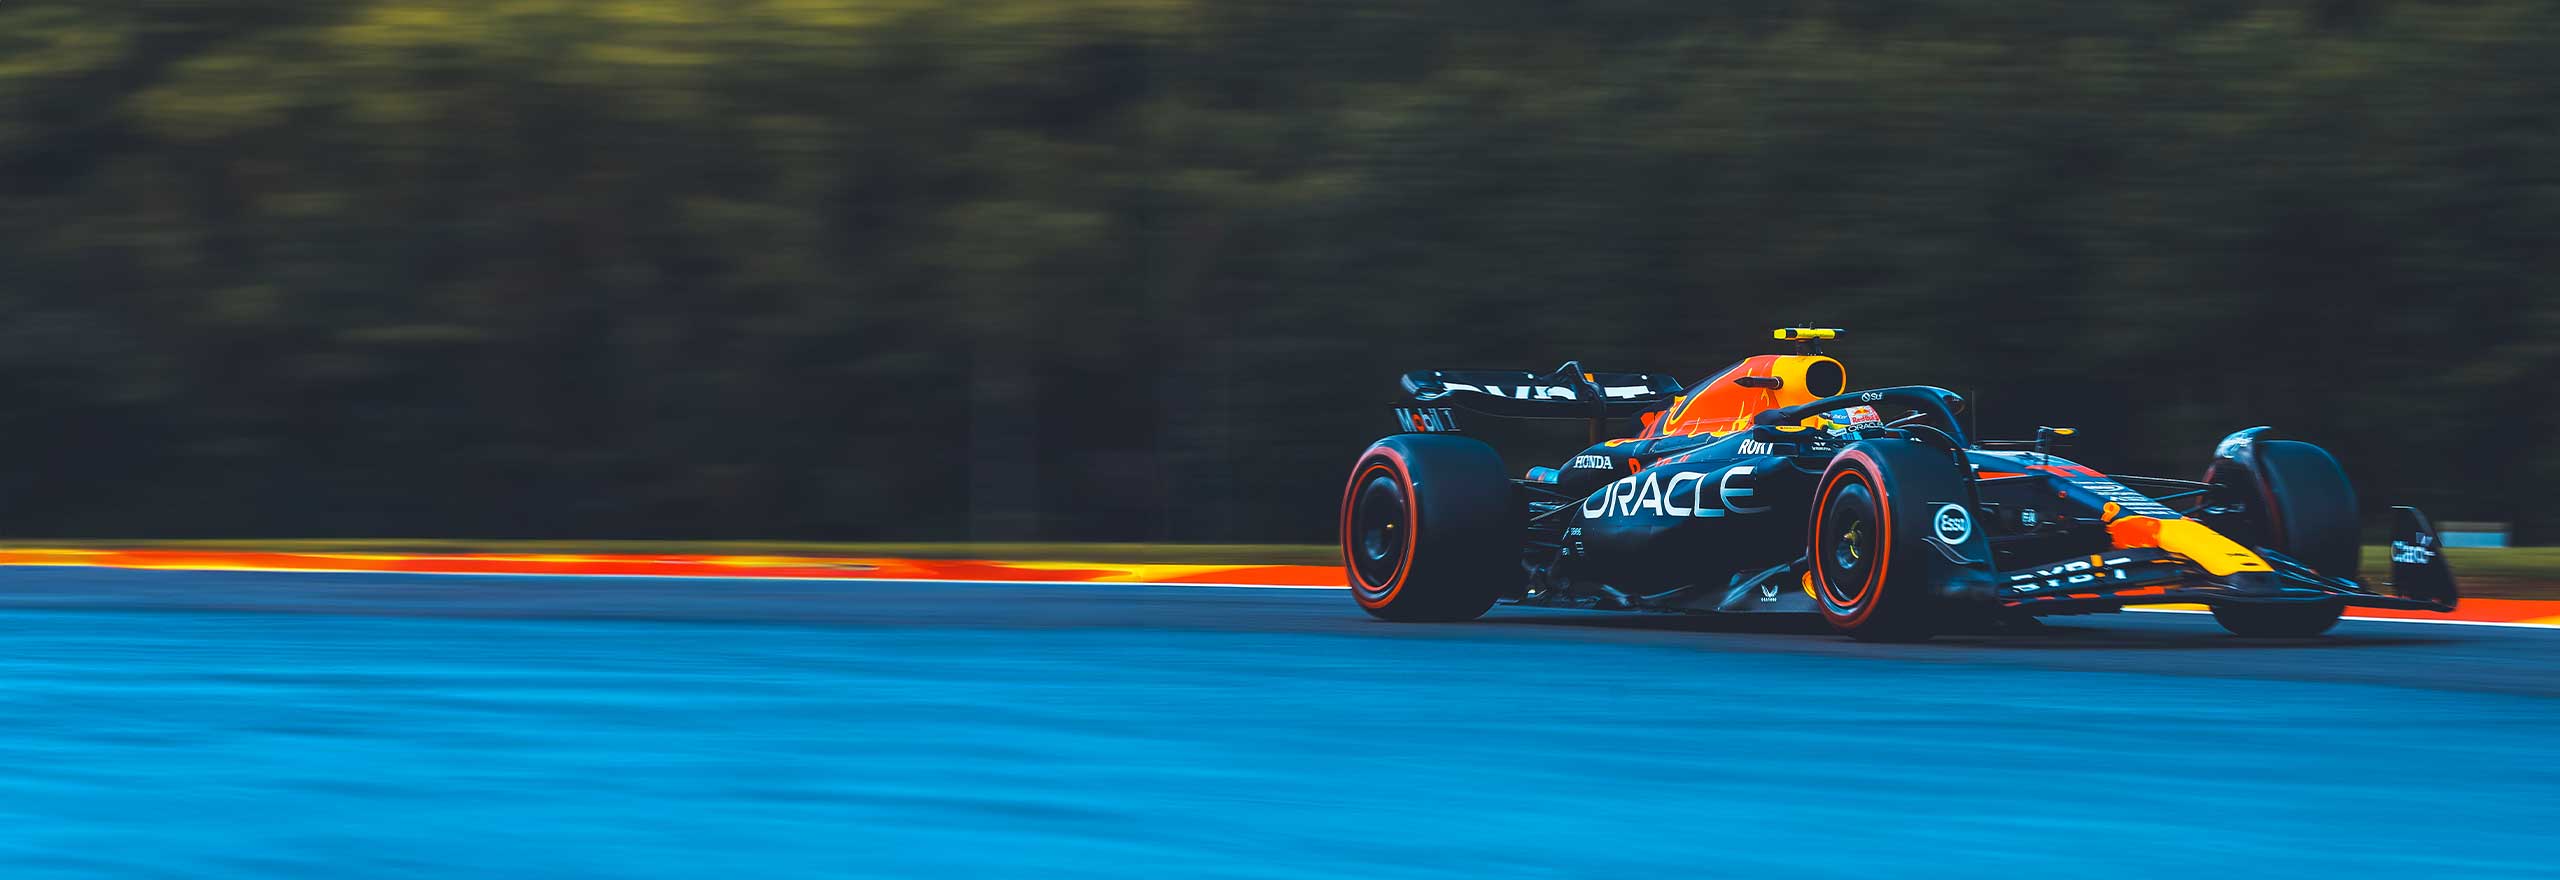 Shaping victory with Red Bull Racing